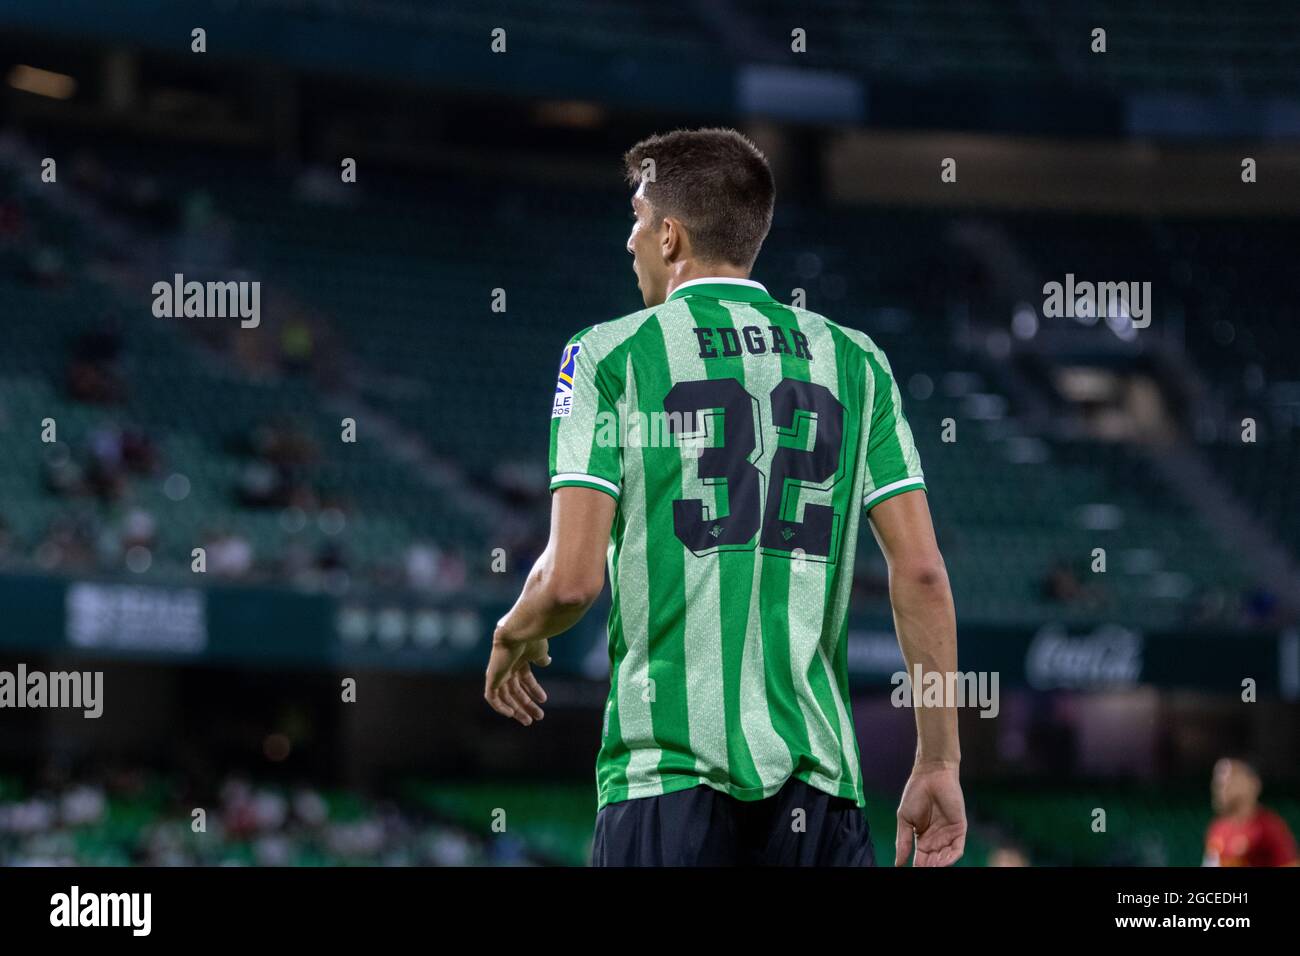 SEVILLE, Spain. 07th Aug, 2021. ƒdgar of Real Betis BalompiŽ during the  friendly match between Real Betis BalompiŽ and AS Roma. Credits: Mario D'az  Rasero/Medialys Images/Sipa USA Credit: Sipa USA/Alamy Live News